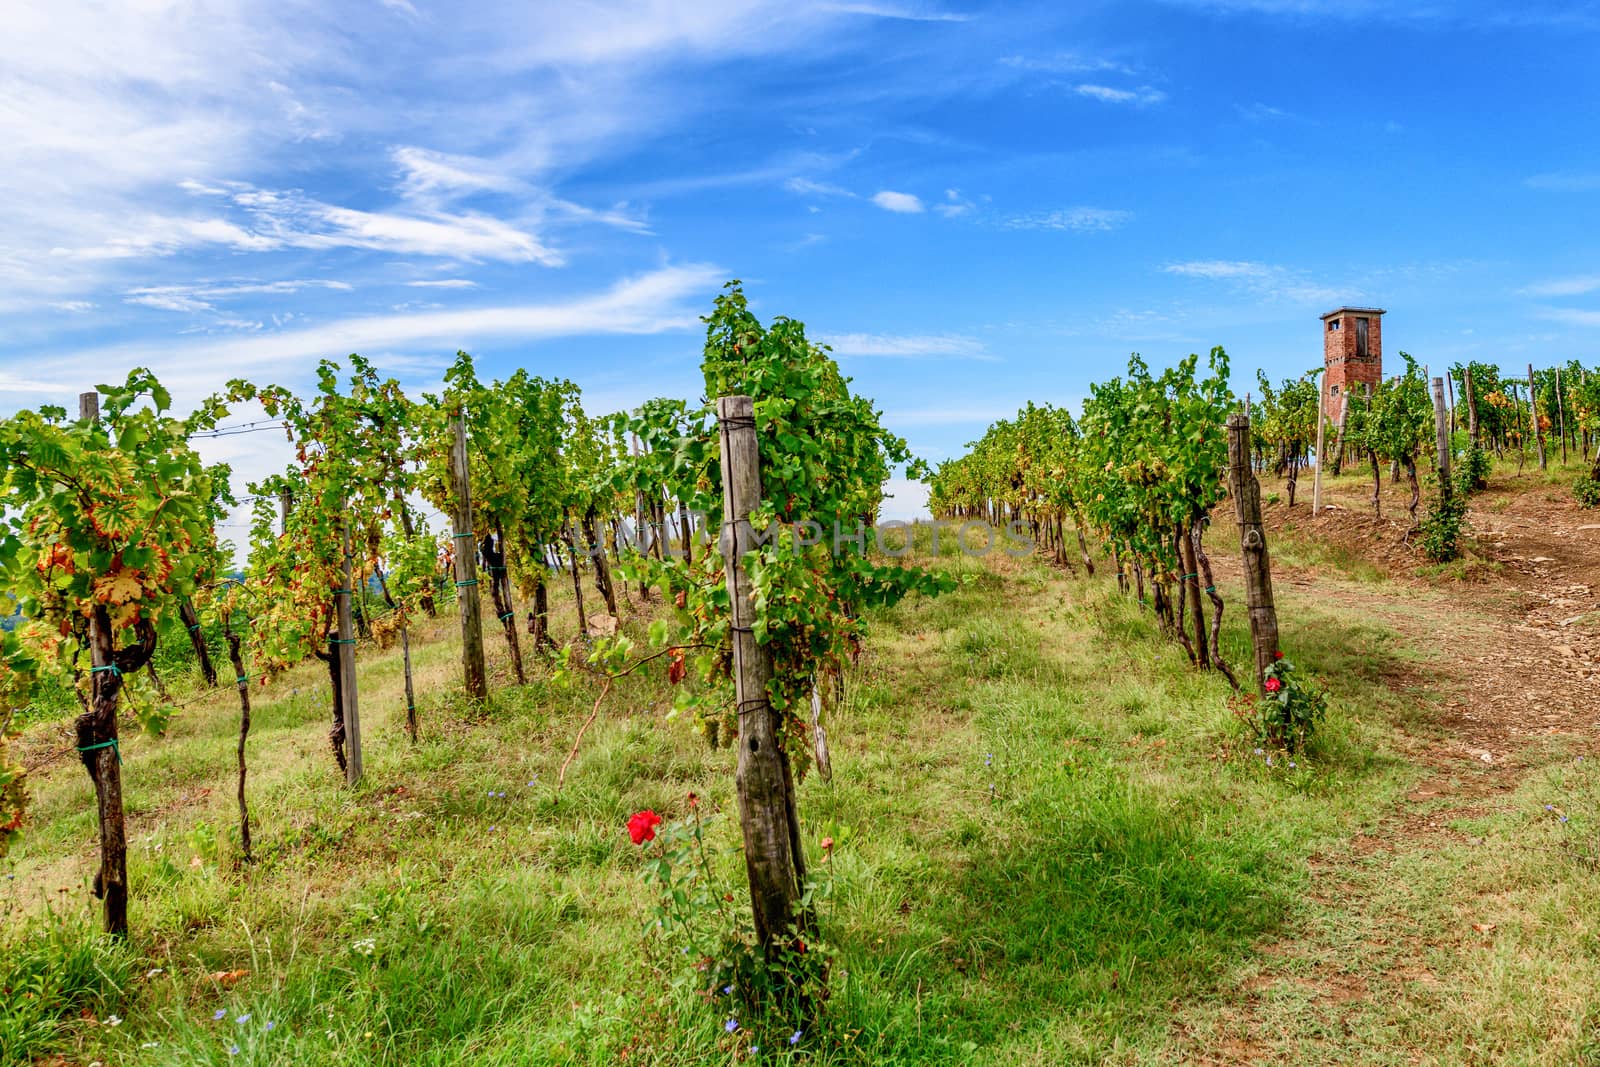 Vineyards with rows of grapevine in Gorska Brda, Slovenia, a famous wine groeing and producing region, becoming also a popular travel destination. Old military watch tower in background overseeing Italy